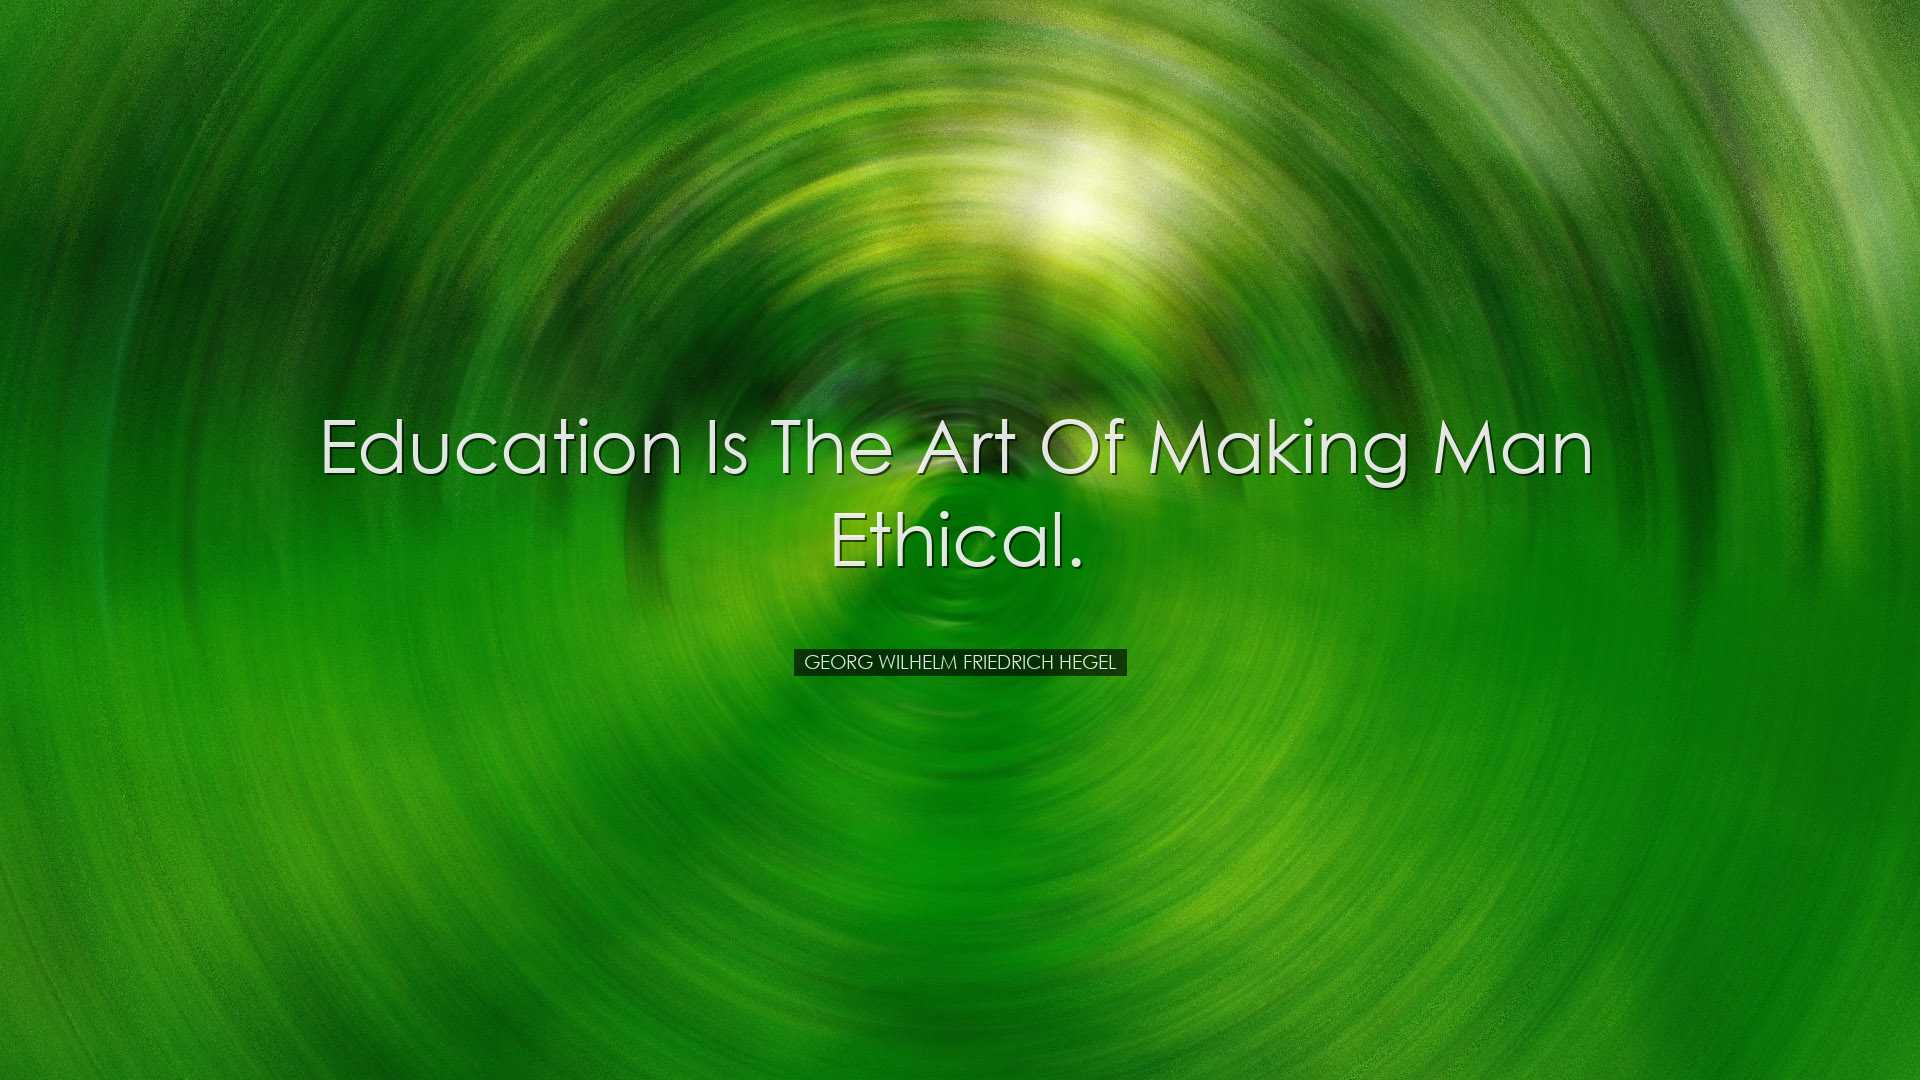 Education is the art of making man ethical. - Georg Wilhelm Friedr